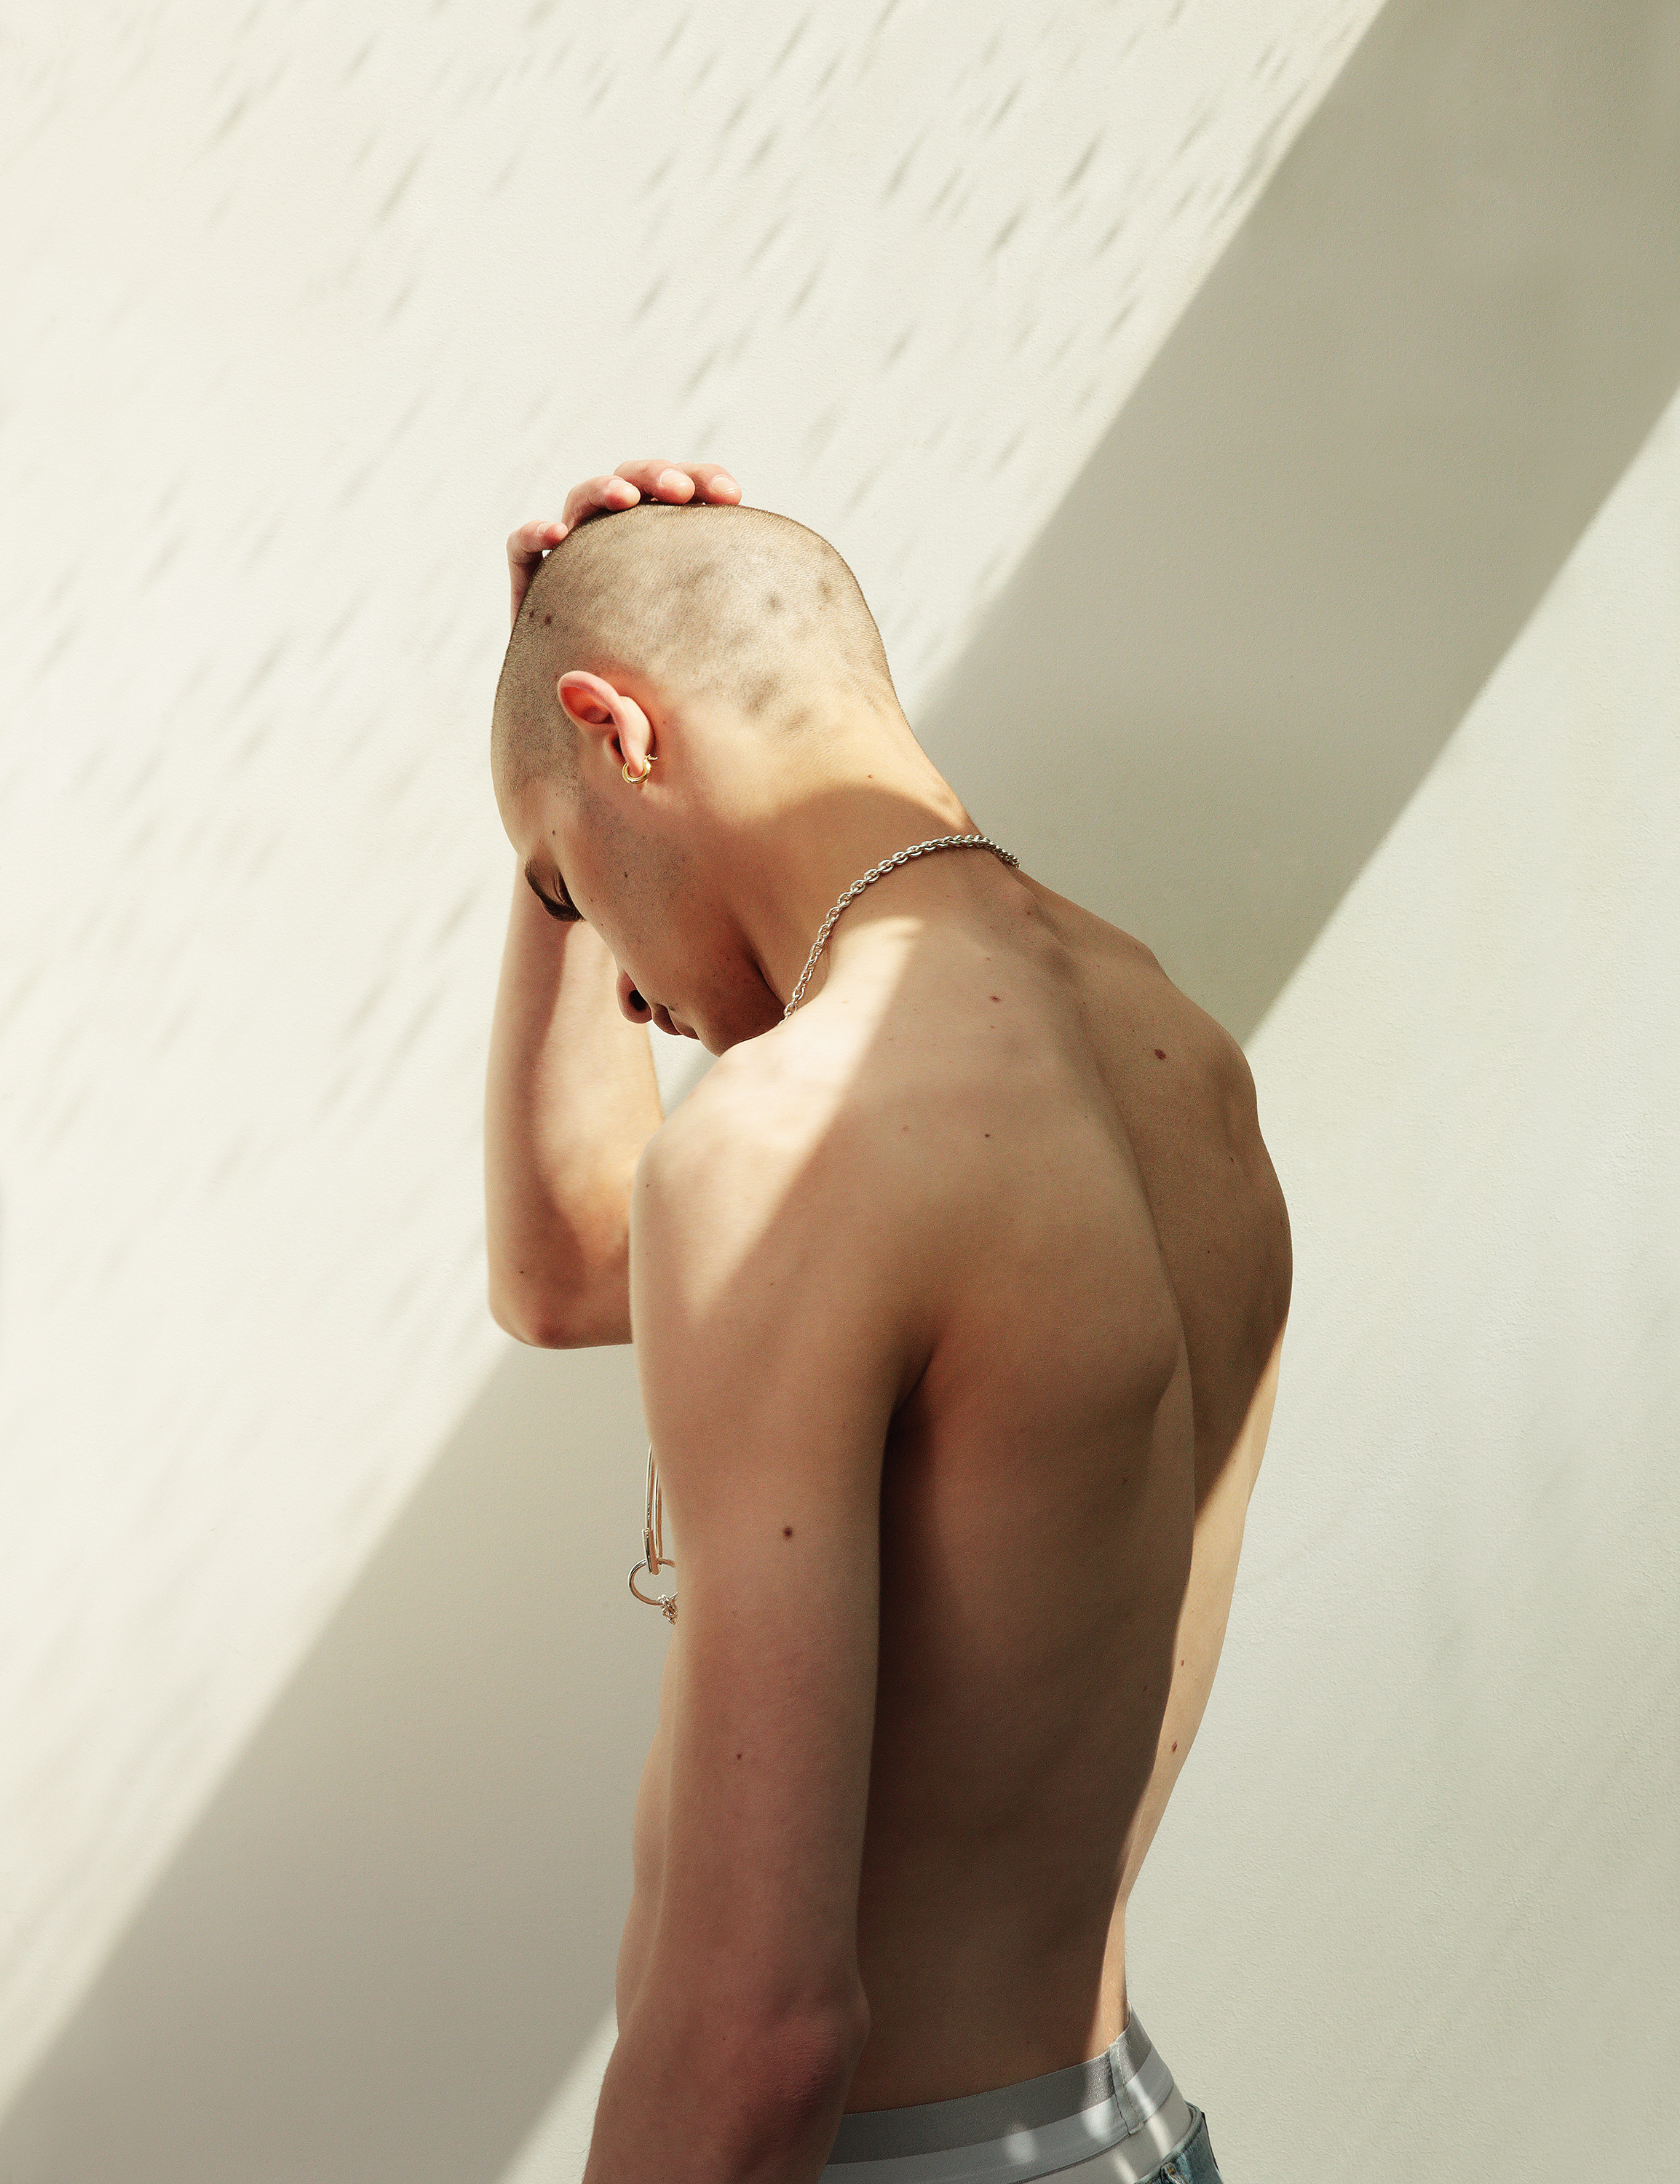 man with shaved head facing away from the camera against a white wall